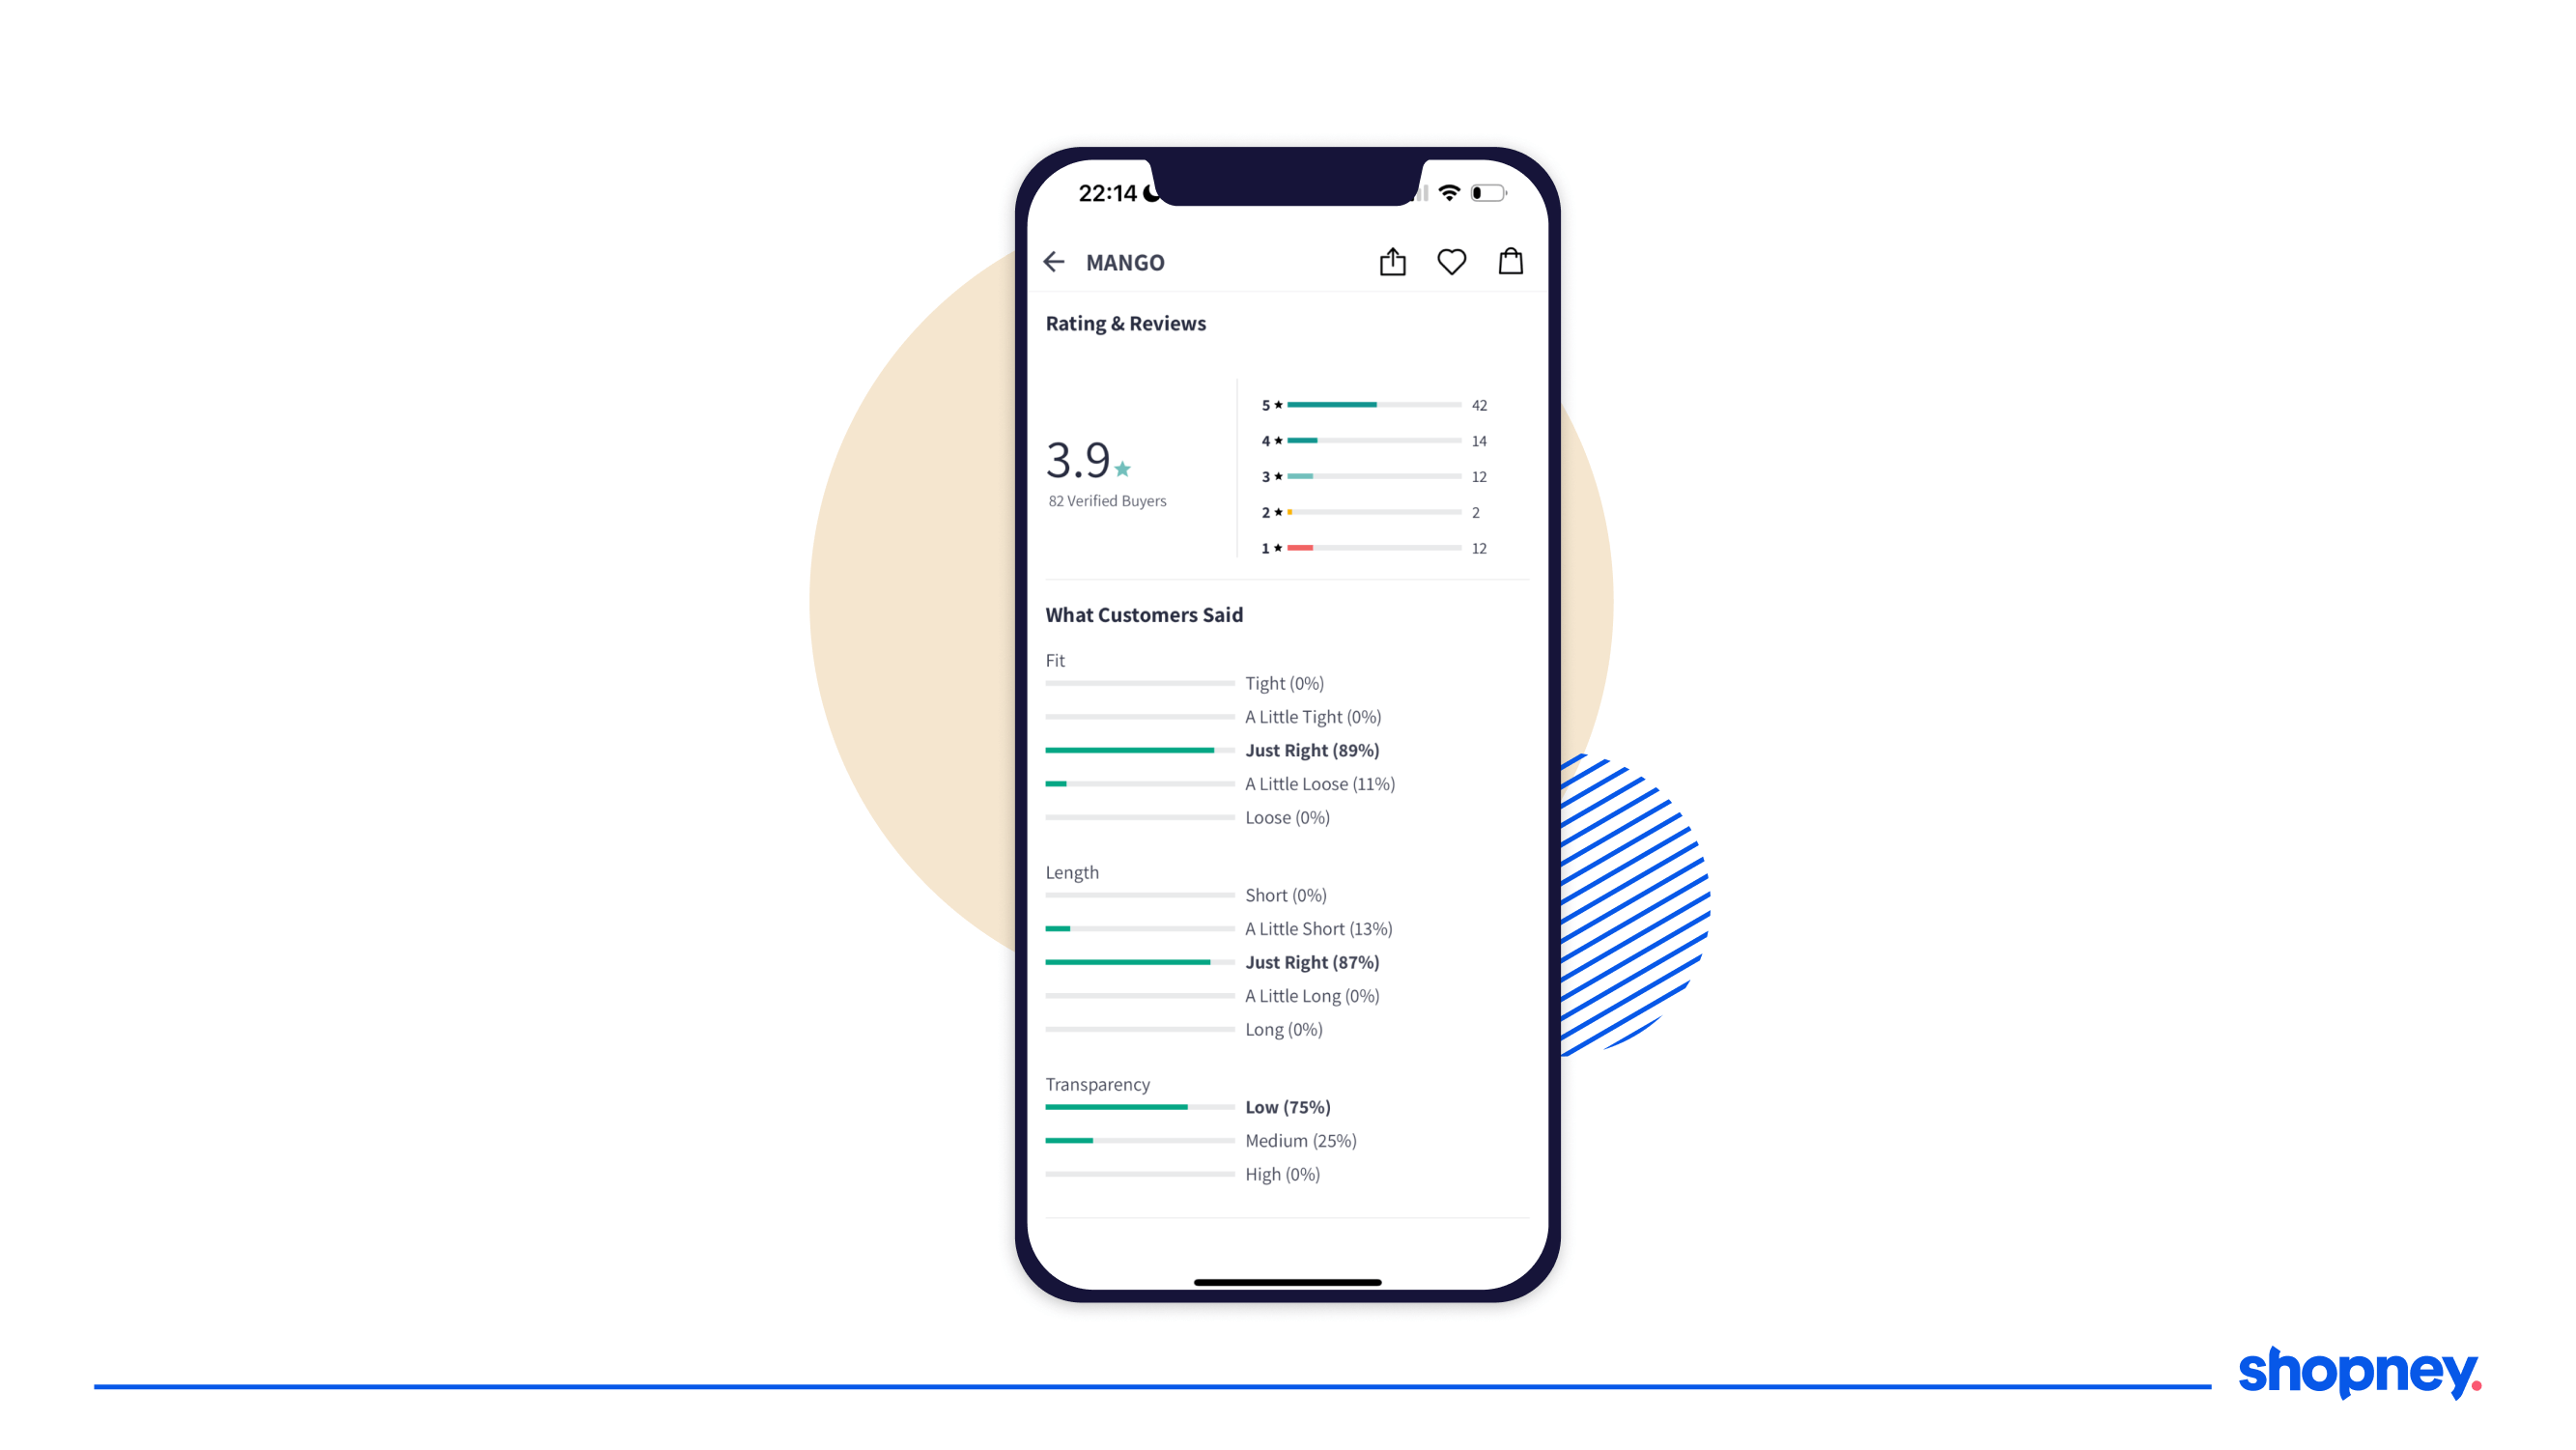 Product ratings on the mobile app